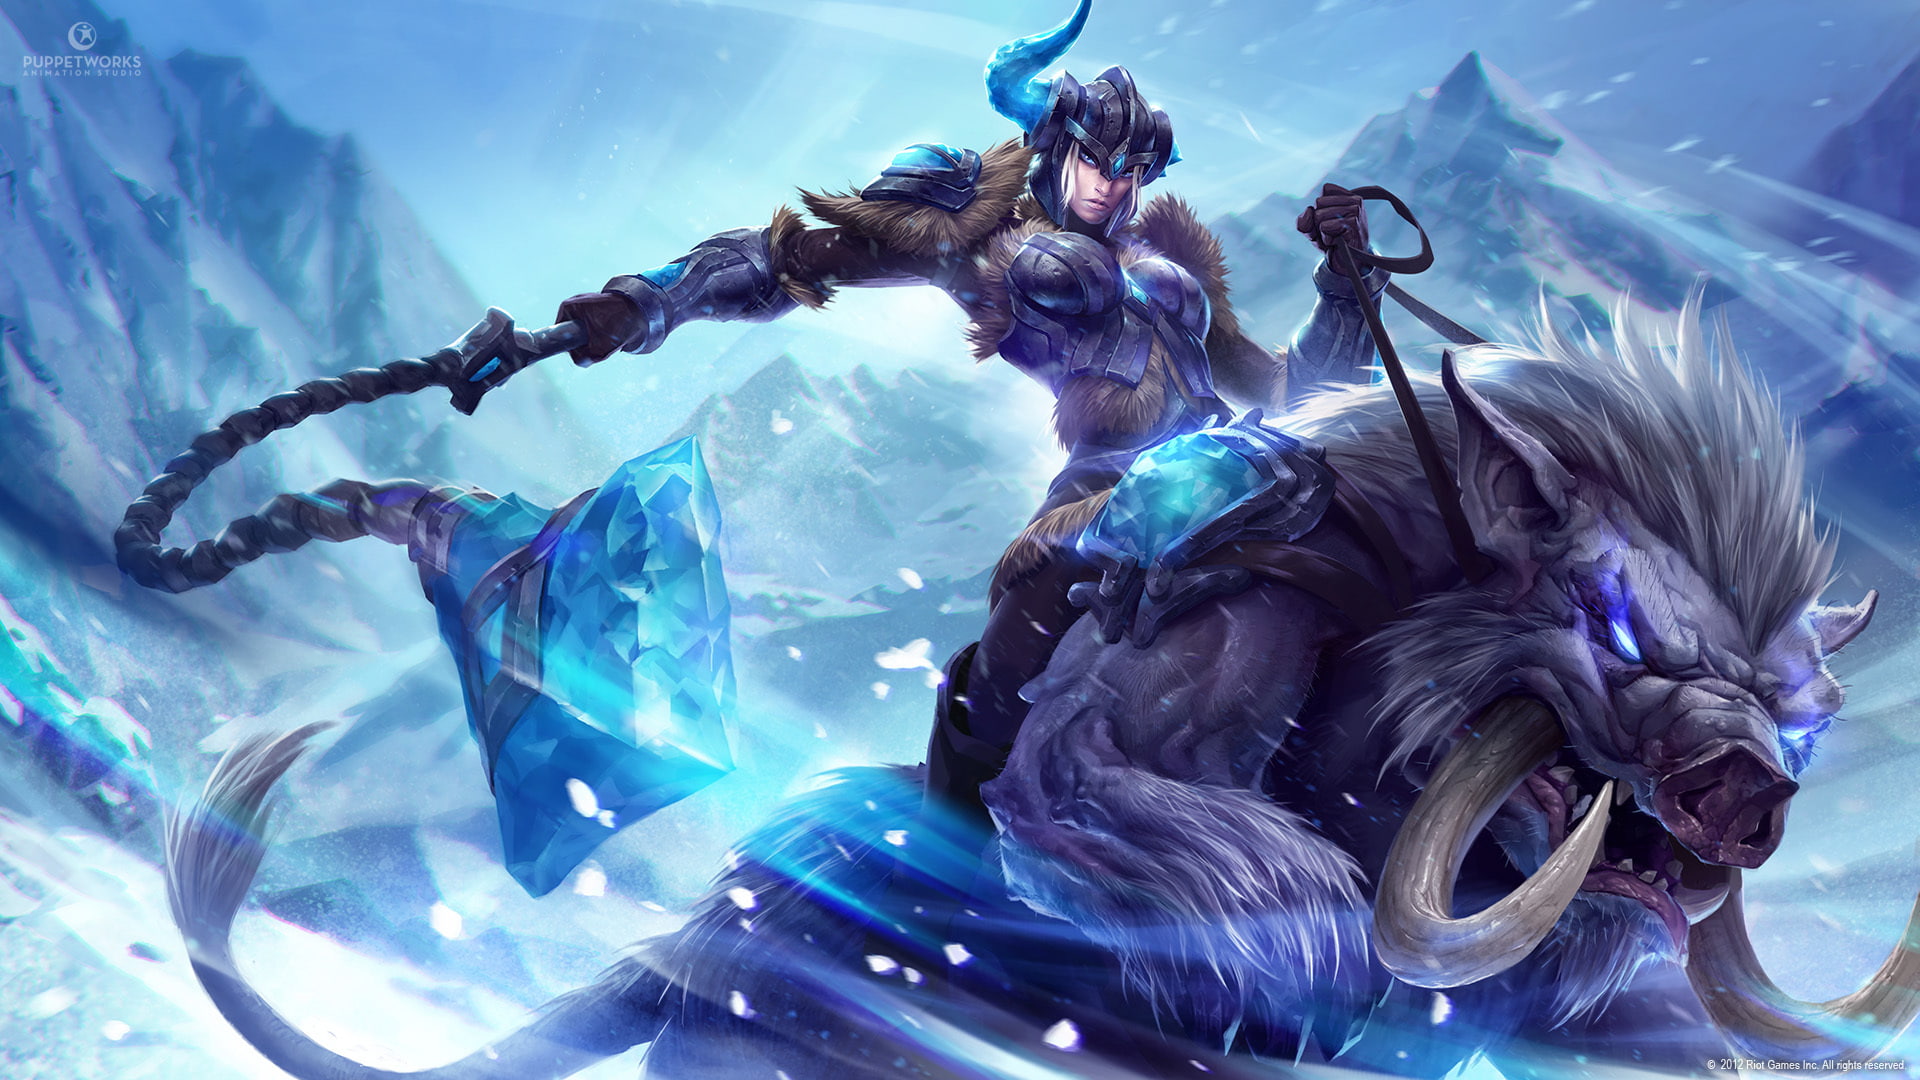 crystal, girl, snow, mountains, weapons, monster, art, horn